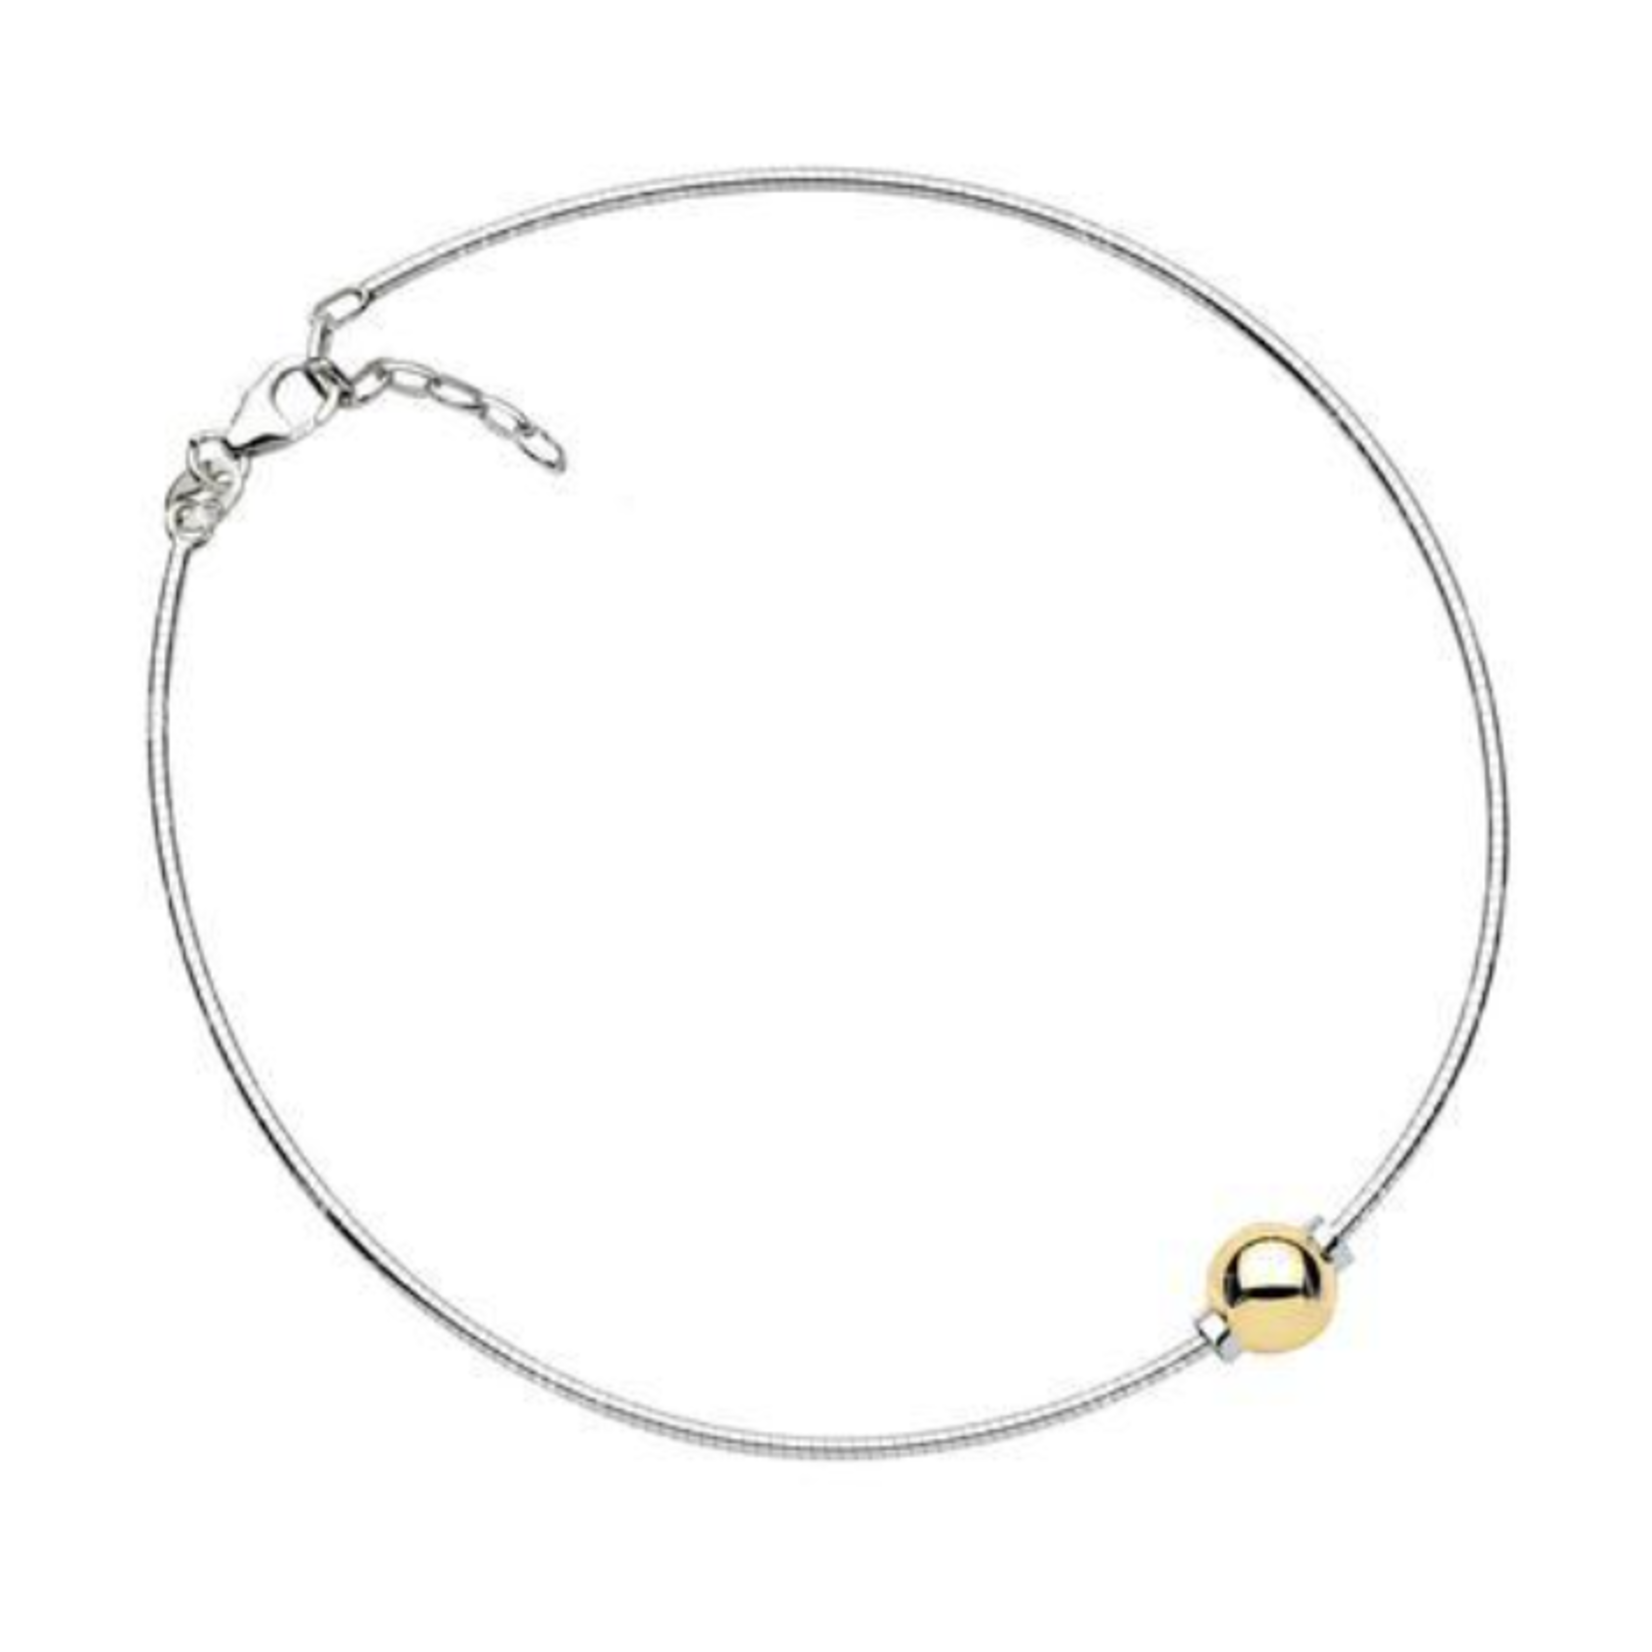 Cape Cod Silver and 14K Yellow Gold Bead Anklet 9"